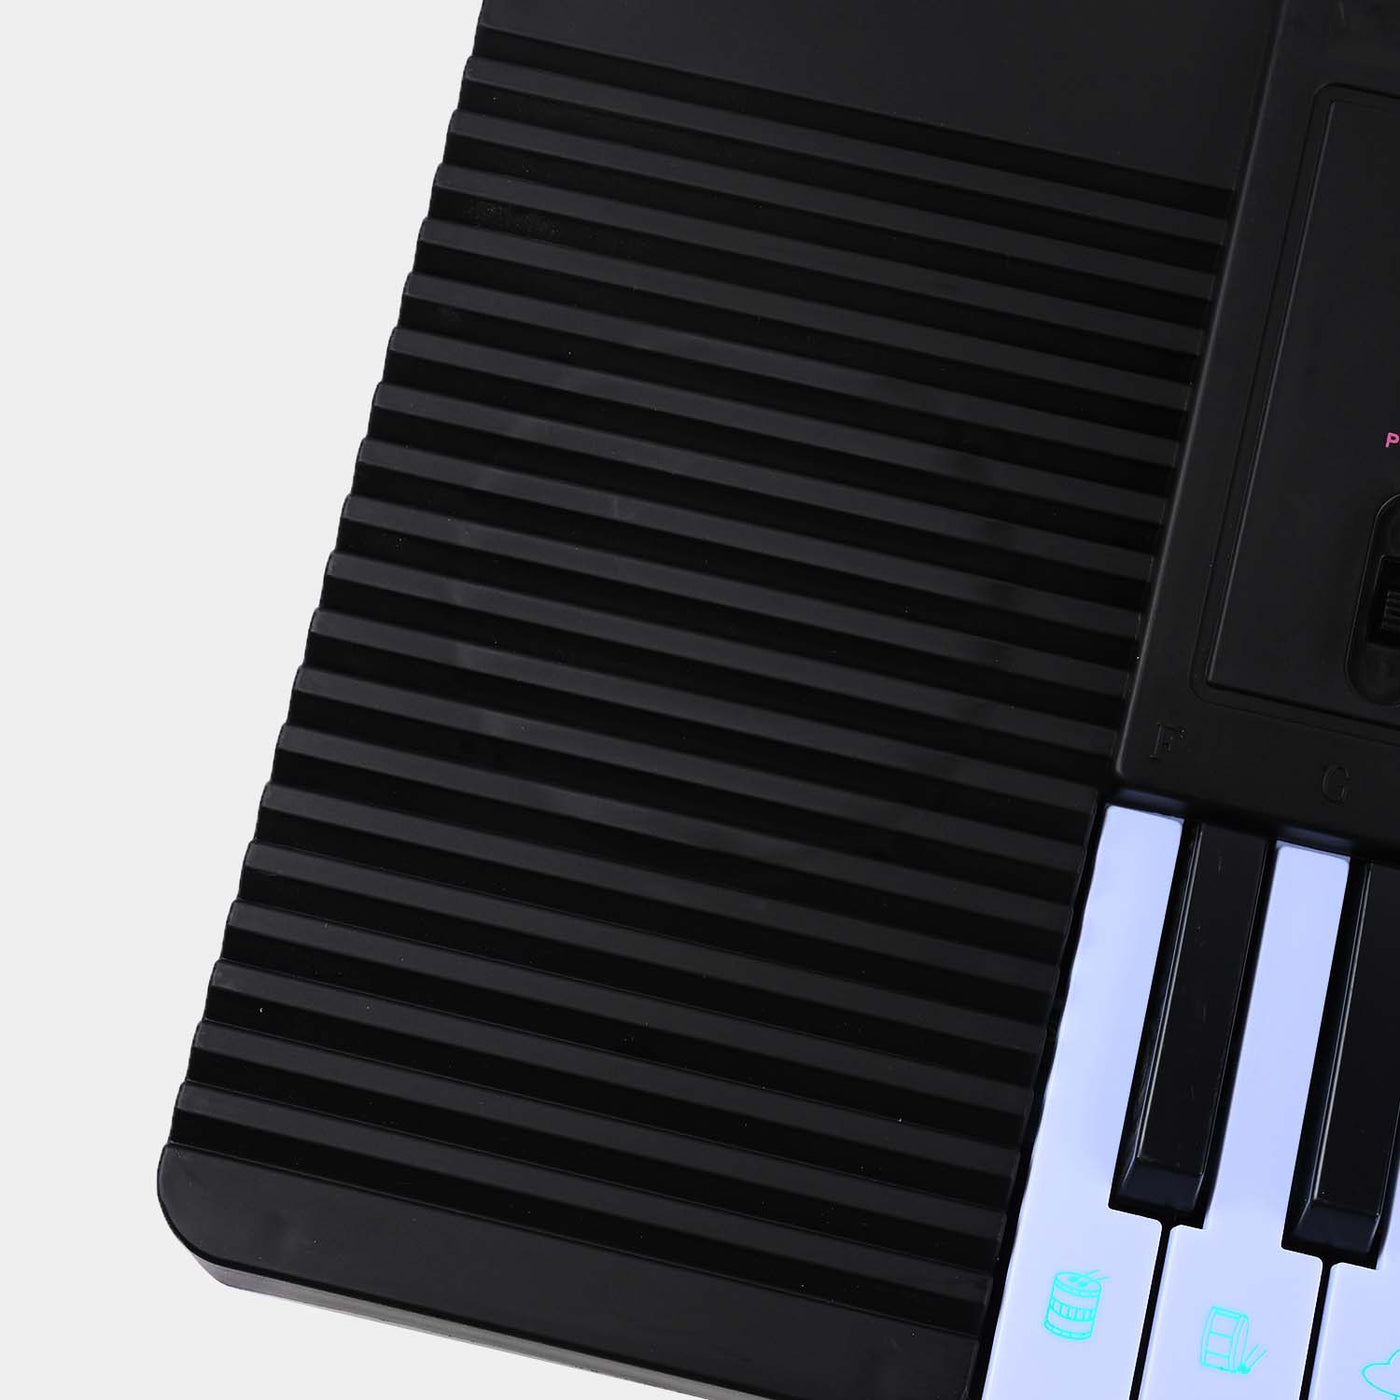 Electronic Keyboard With 2 Speaker